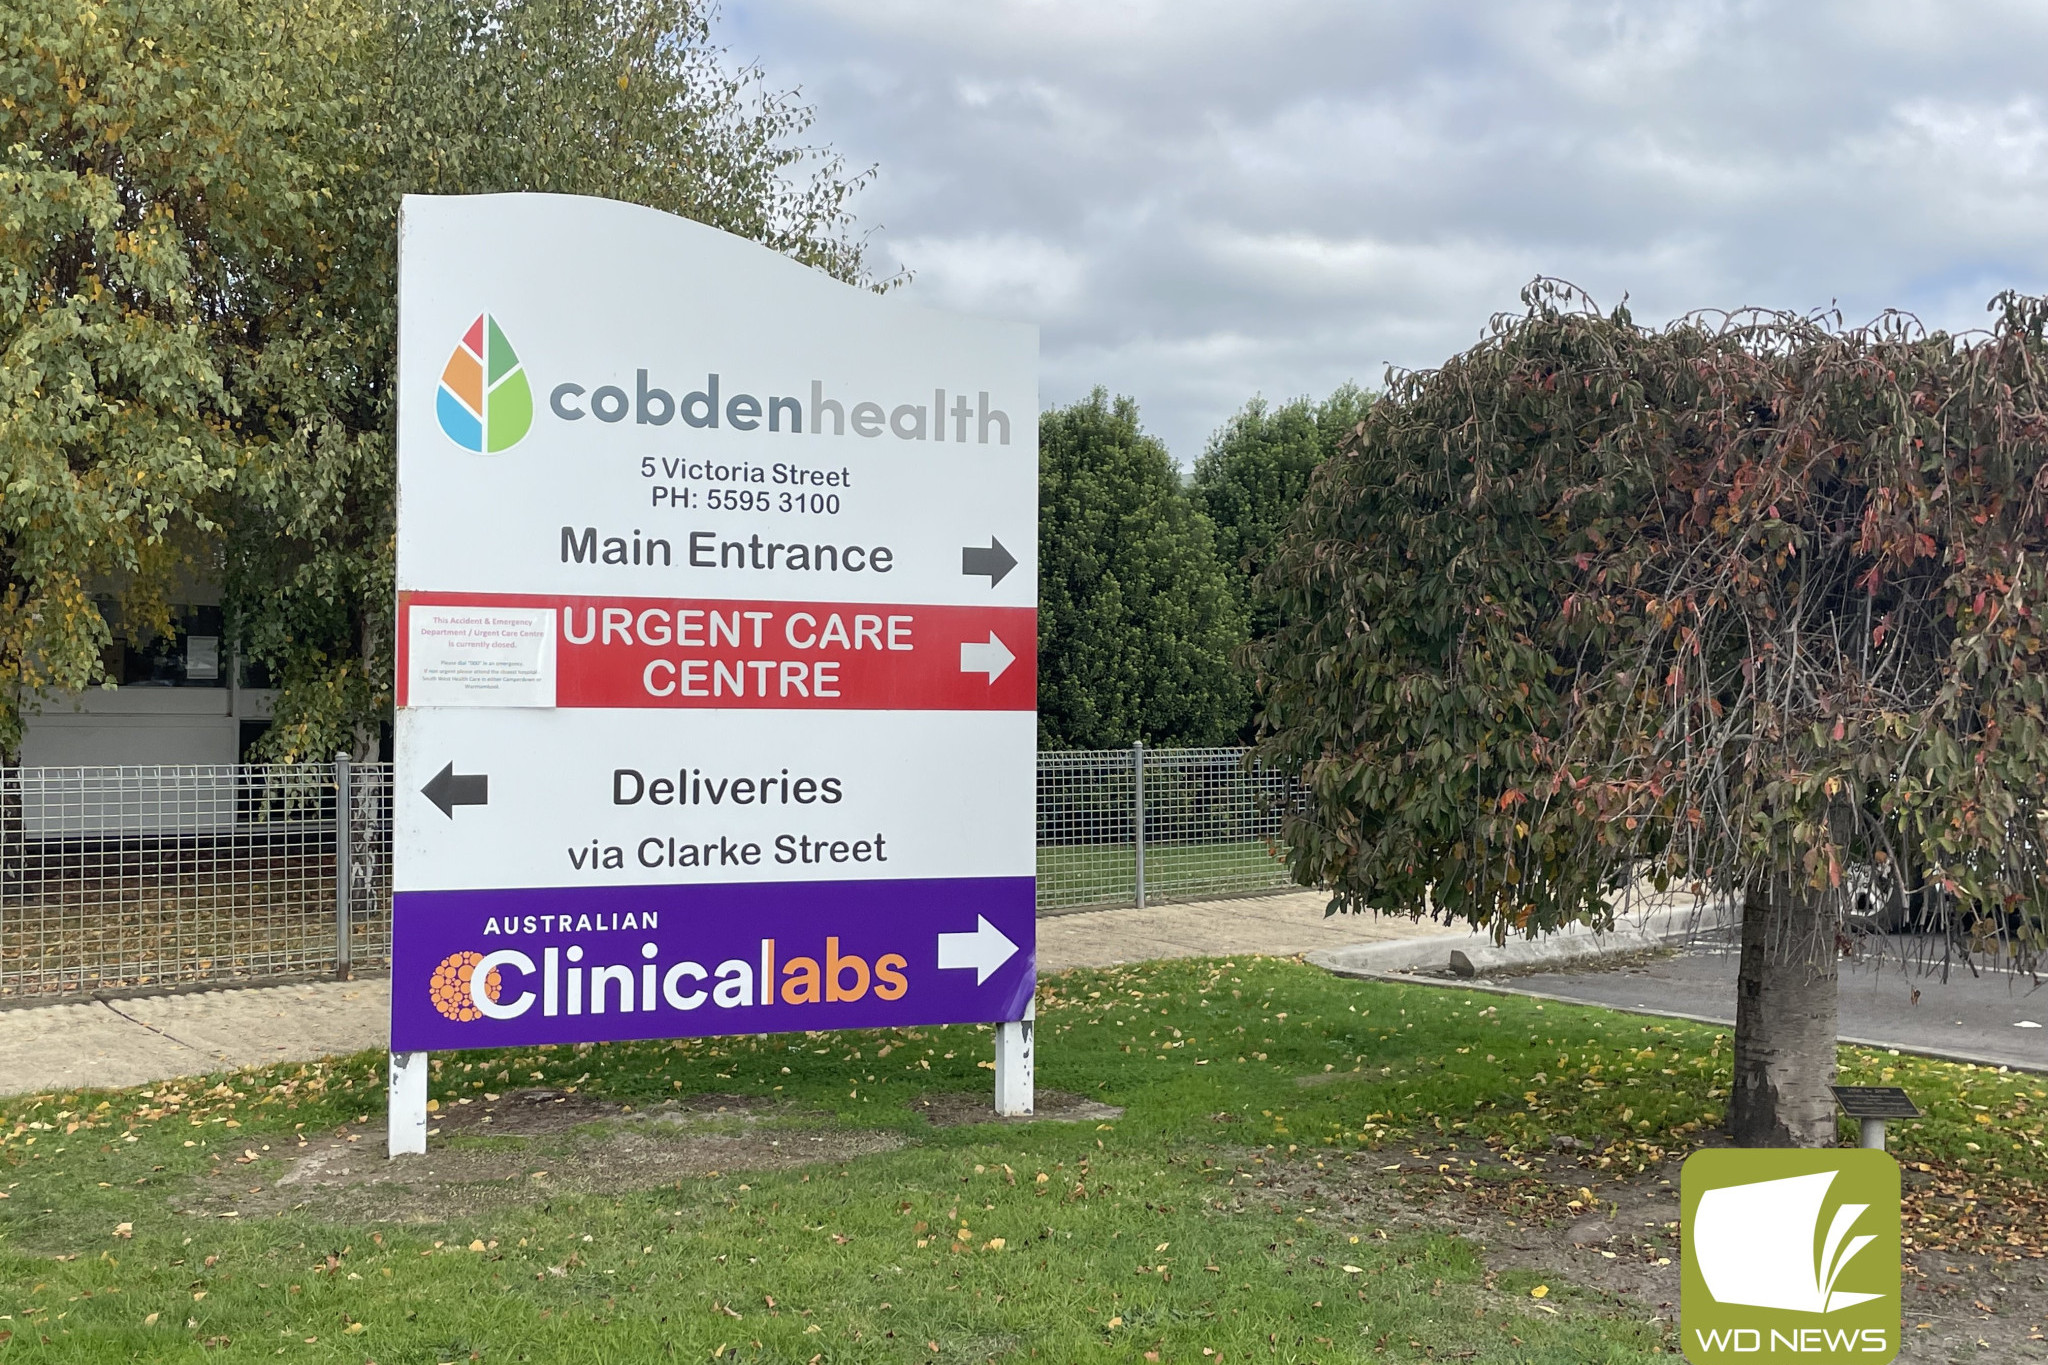 Interim leaders appointed: The Cobdenhealth Board of Management has announced the health service has parted ways with Leading Healthcare after 12 months.